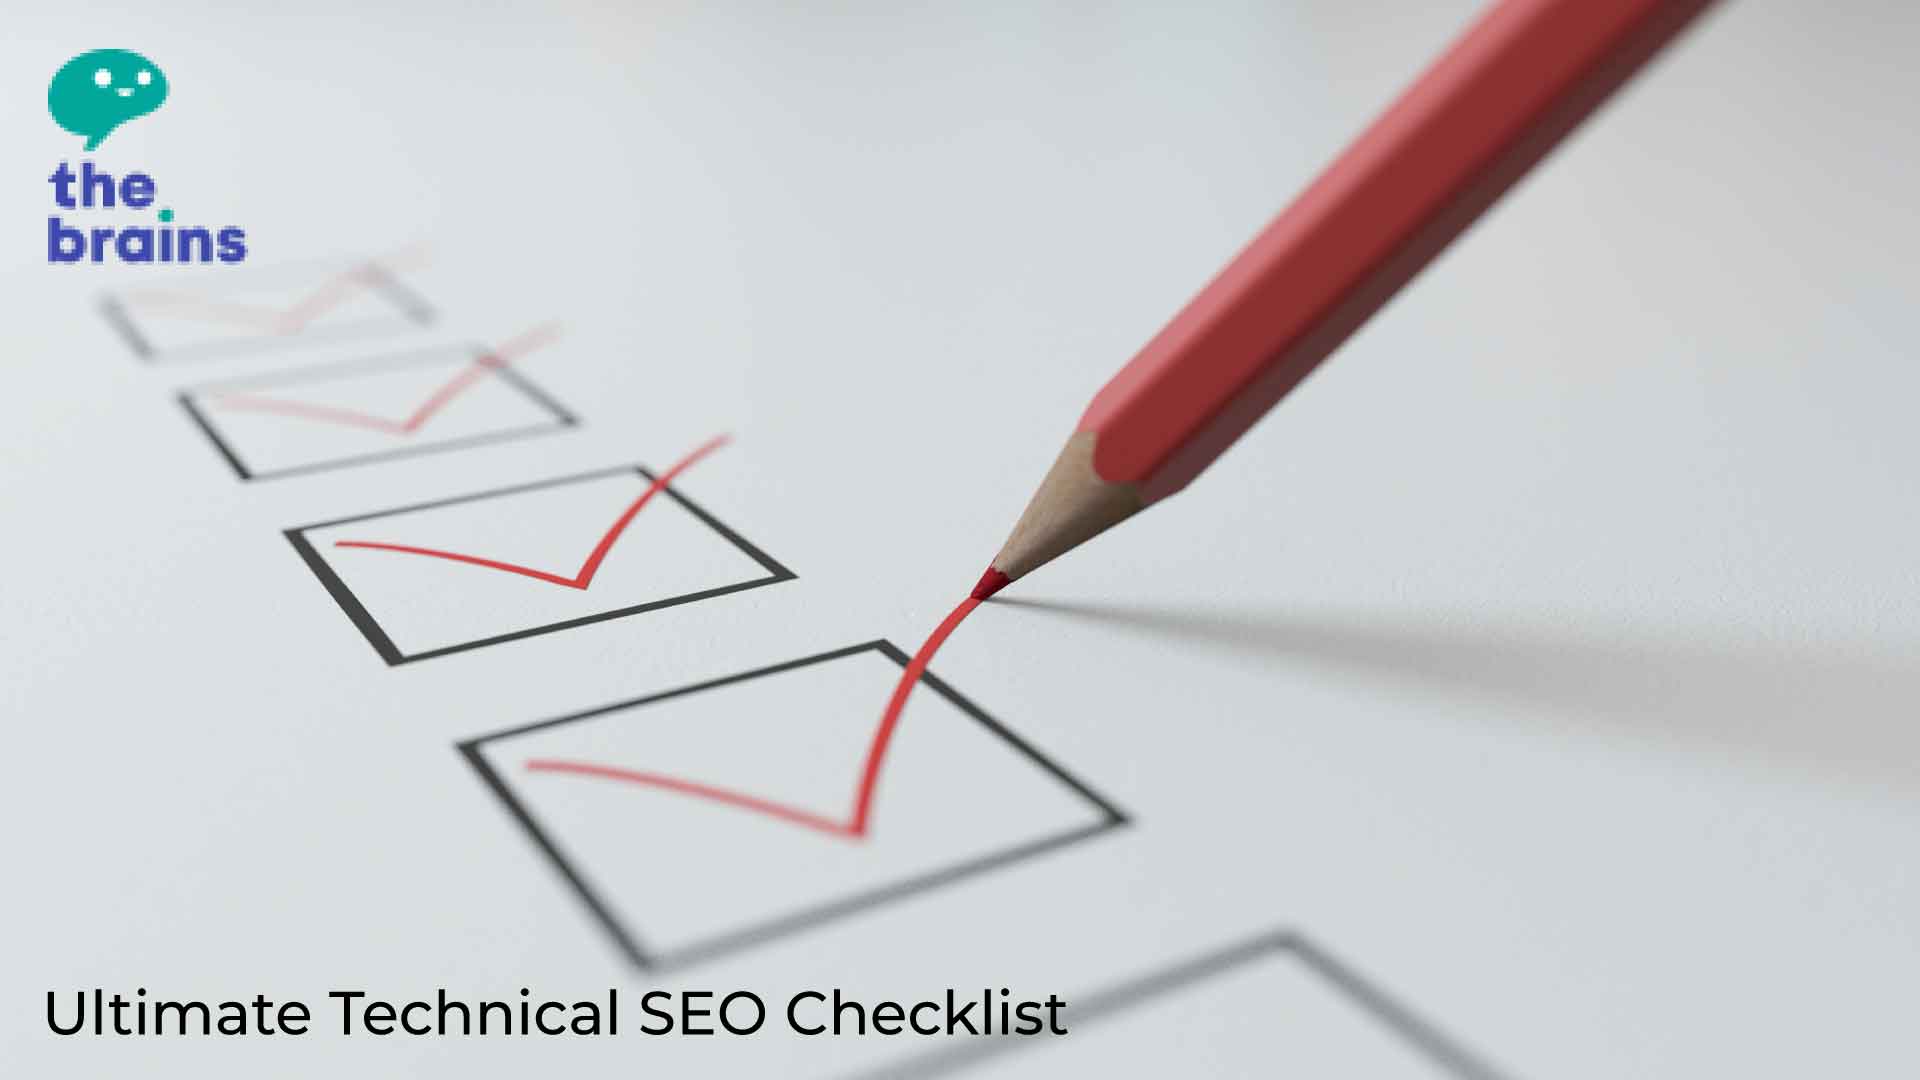 The Brains Share the Ultimate Technical SEO Checklist